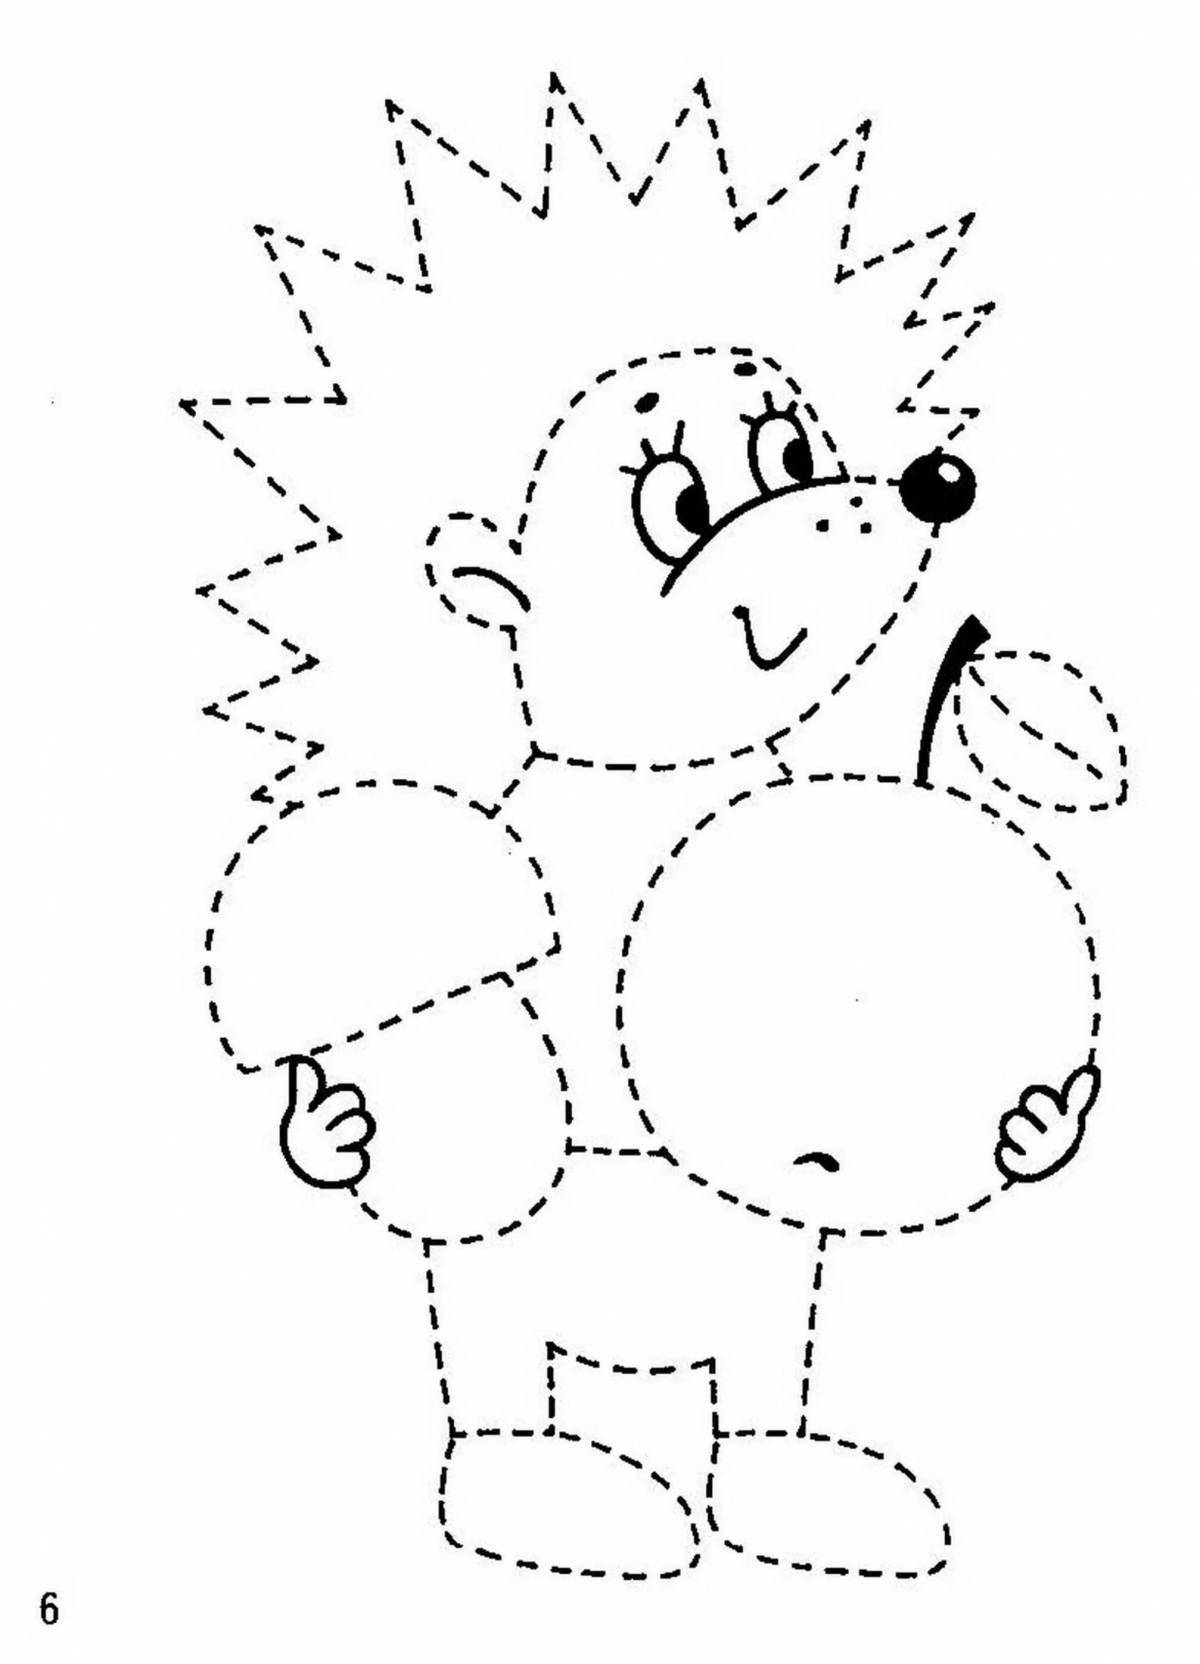 Coloring pages for children 4-5 years old